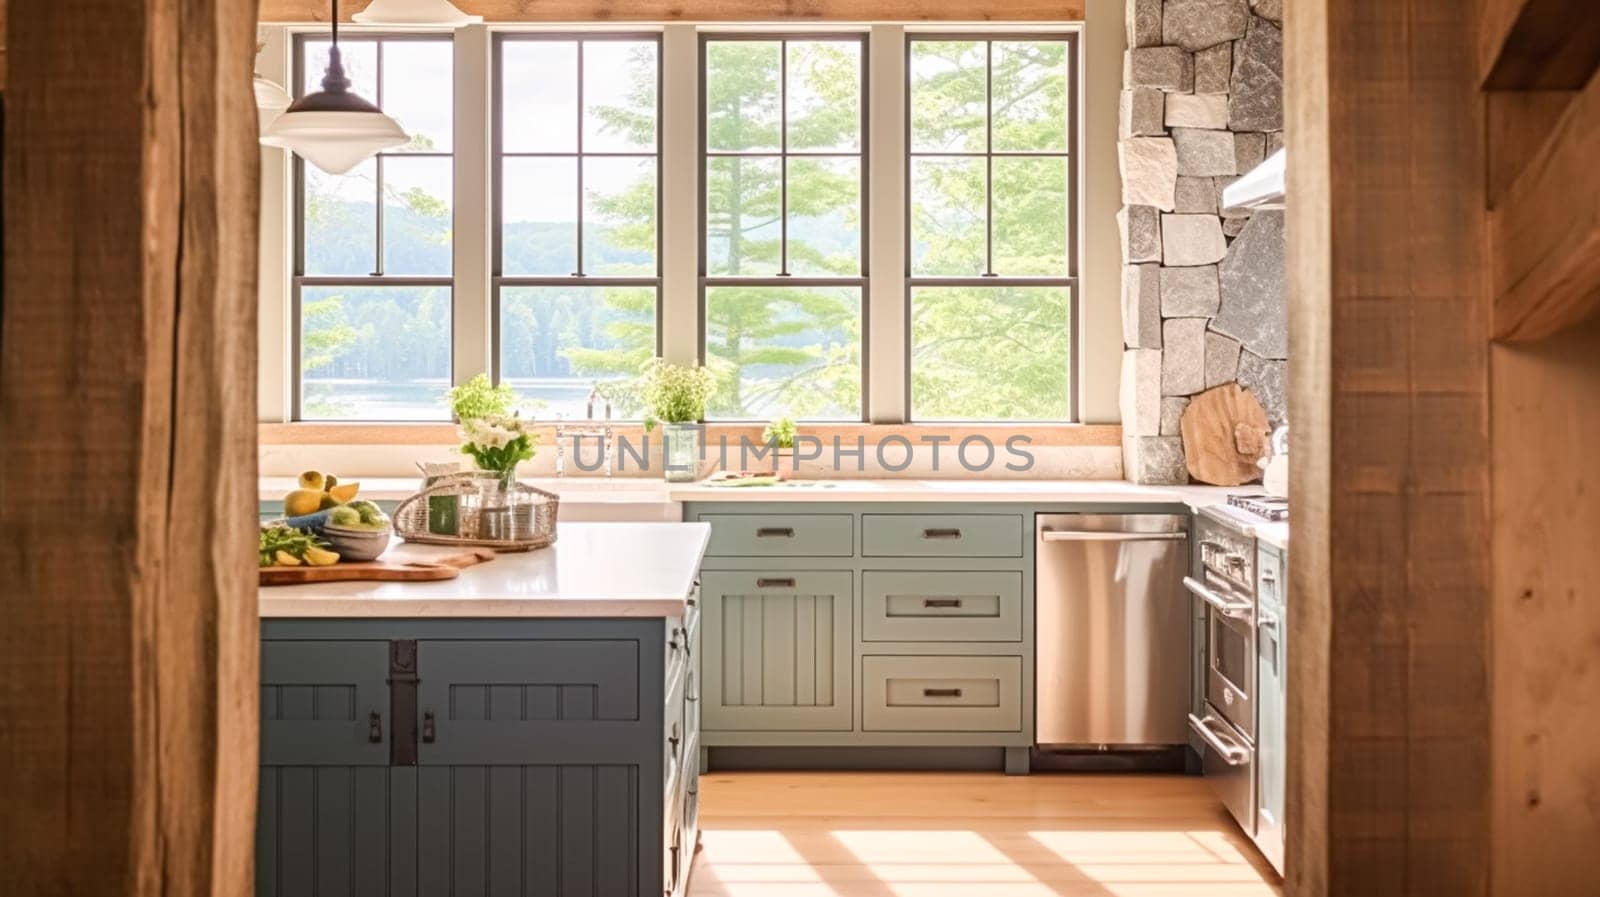 Farmhouse kitchen decor, interior design and furniture, English cottage kitchen cabinets and large window, country house interiors by Anneleven